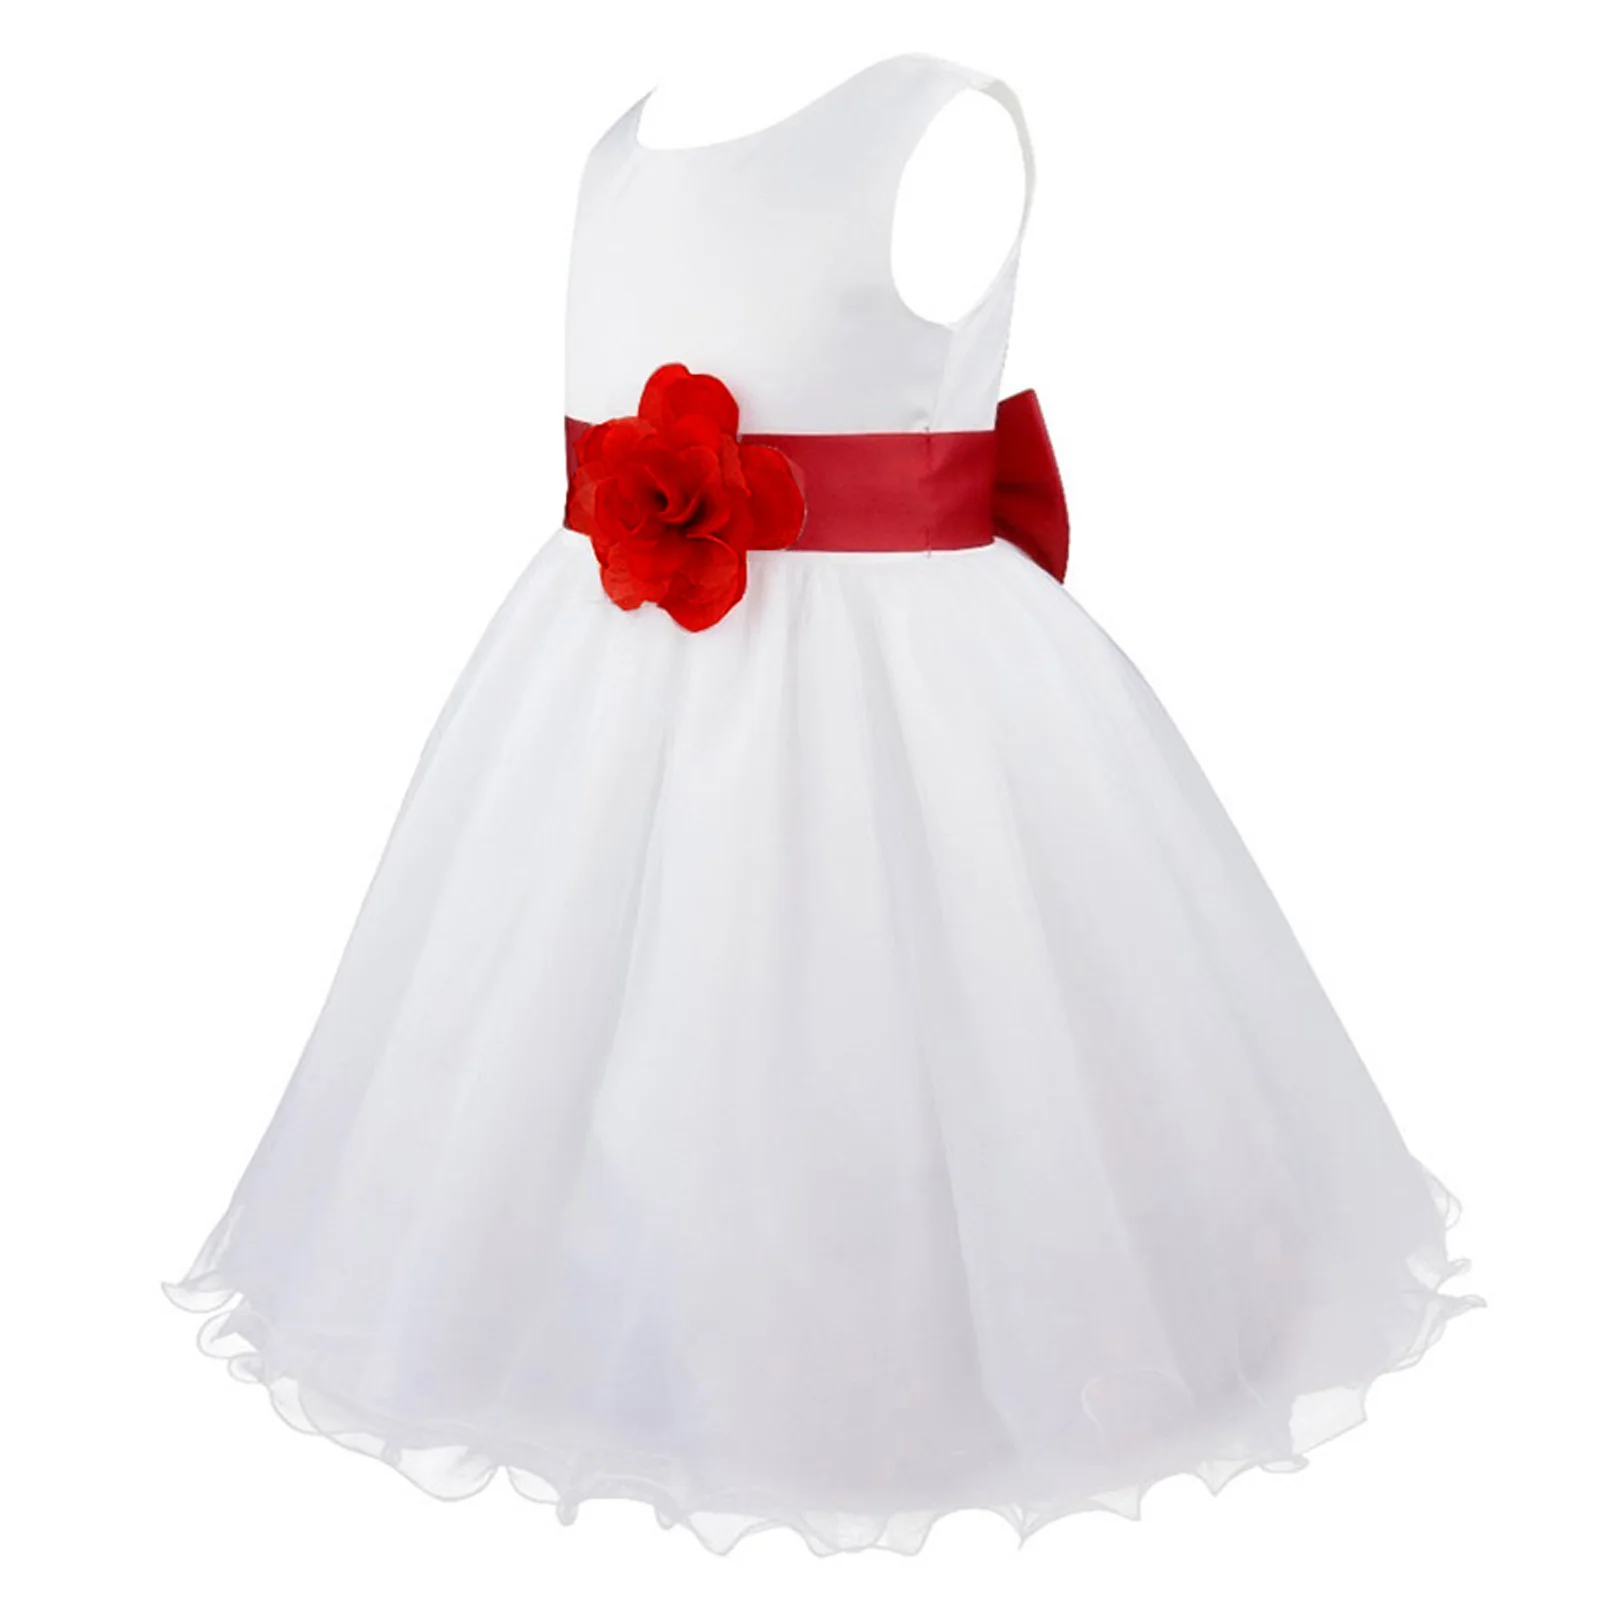 

Girls' Summer Puffy Casual Dresses Flower Belt Baby Girl Wedding Easter Ruffled Tulle Petal Princess Dresses for Party Brithday